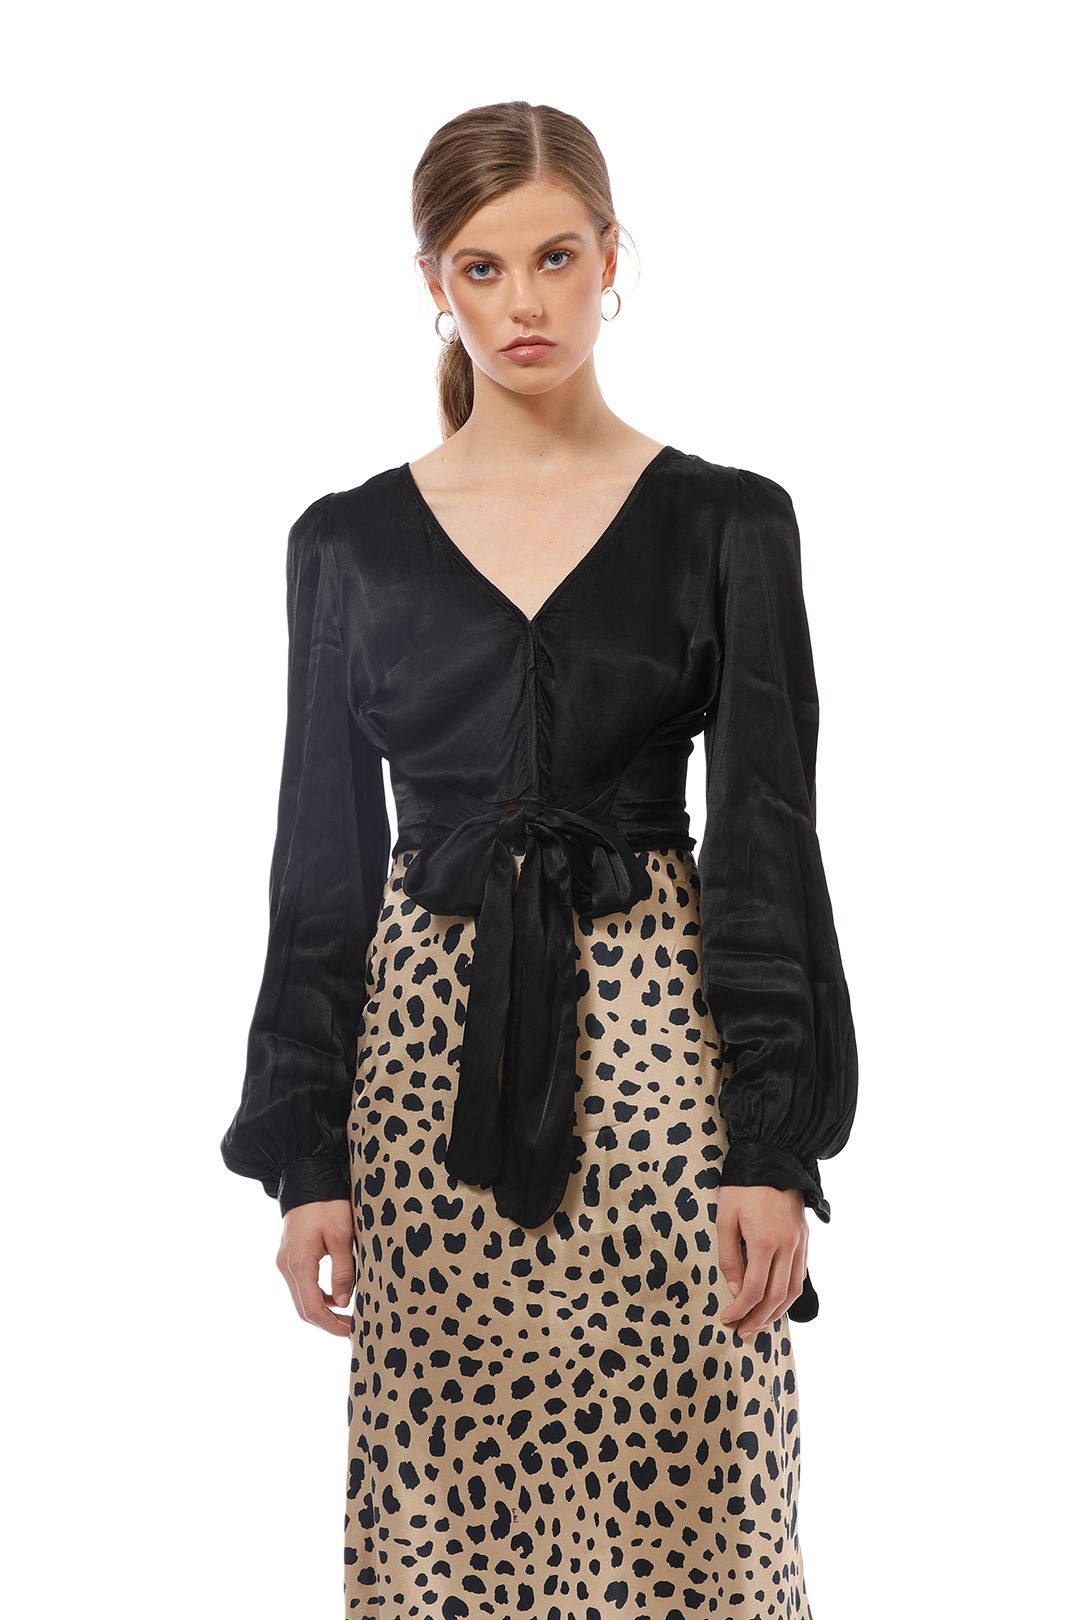 Alice McCall - I Like That Top - Black - Front Crop